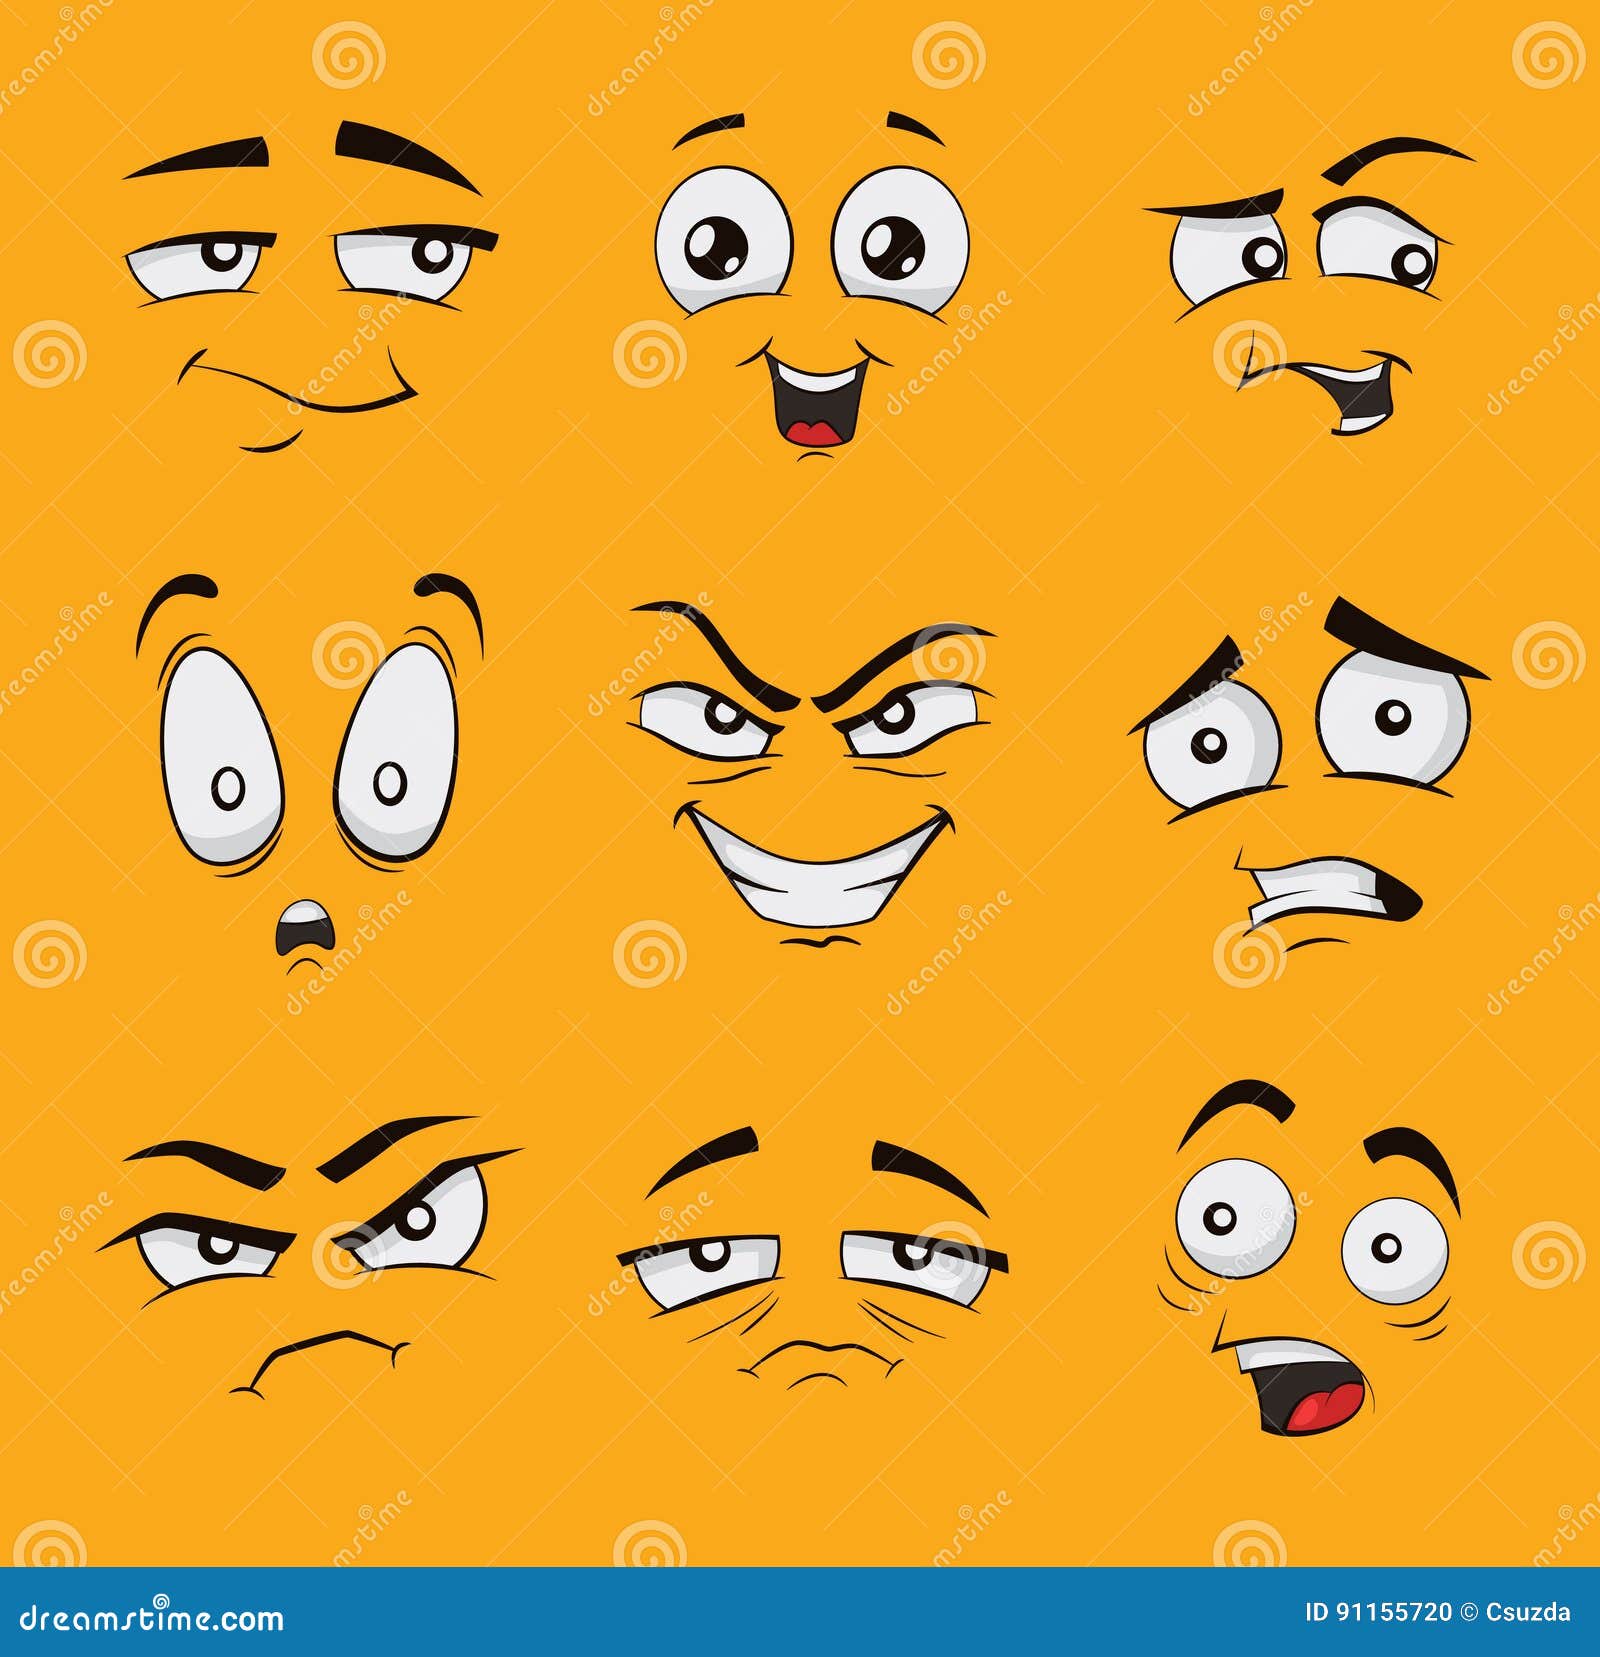 Premium Vector Vector portrait of scared woman, illustration of, scared  face drawing - hpnonline.org